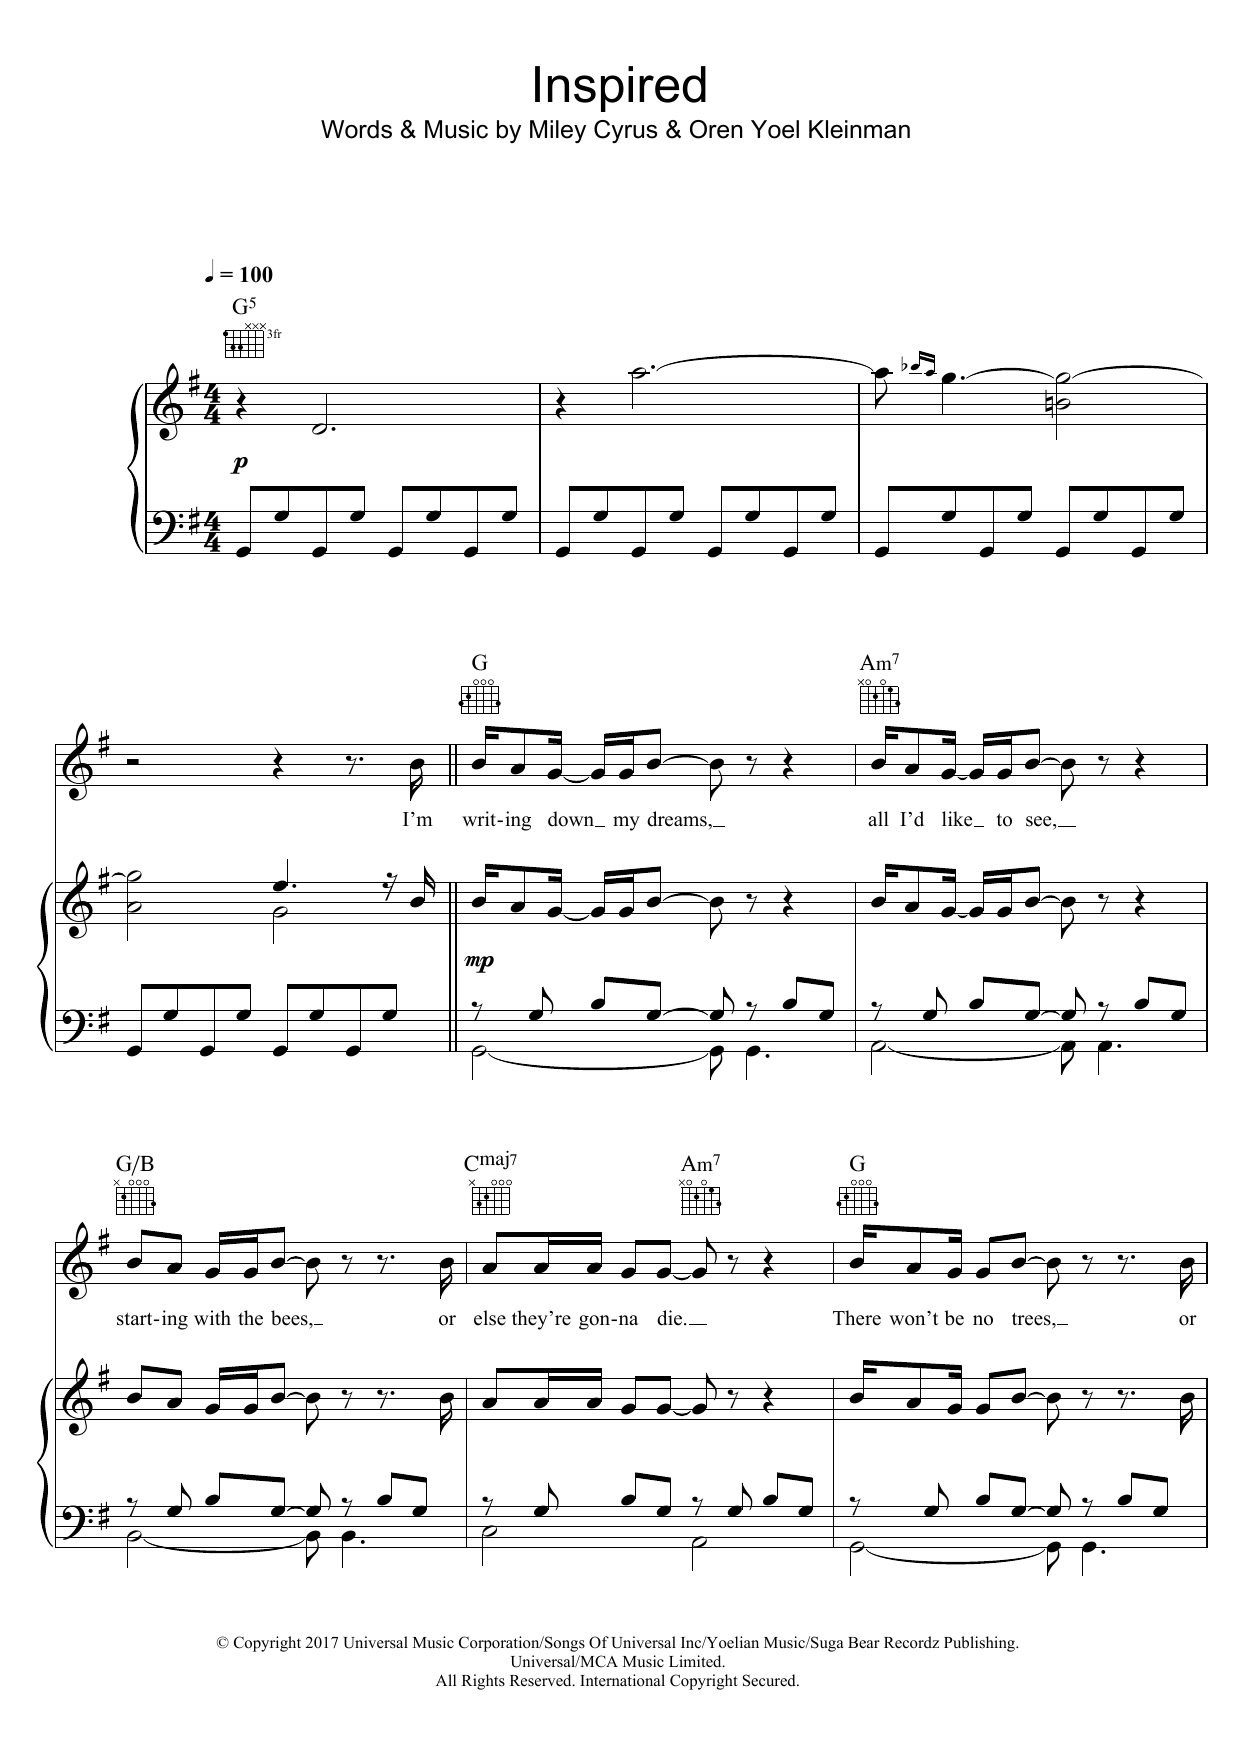 Download Miley Cyrus Inspired Sheet Music